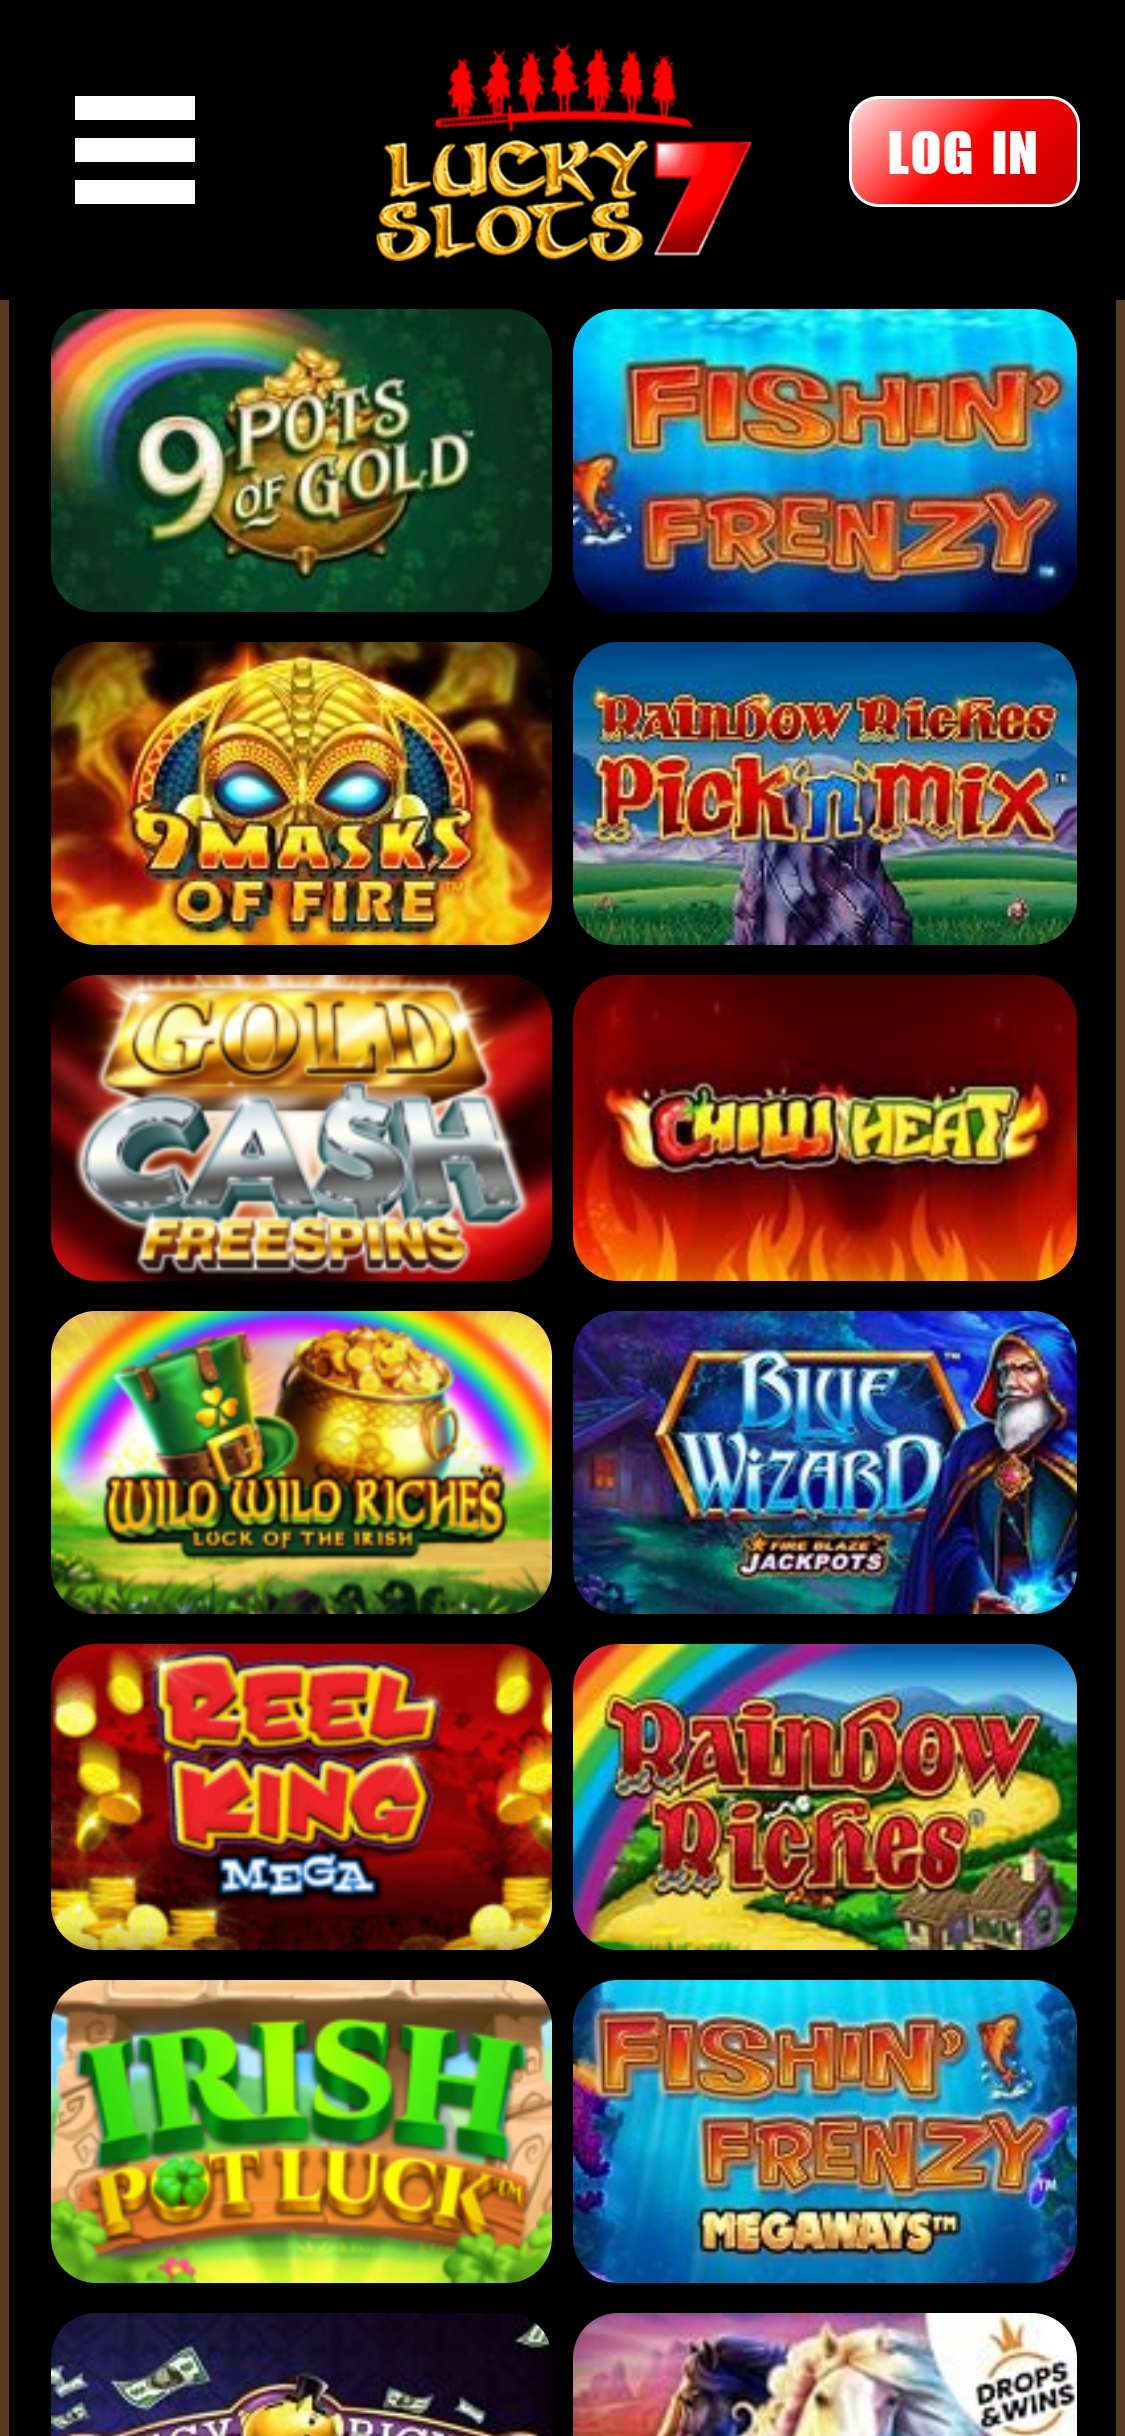 Lucky Slots 7 Casino Mobile Games Review